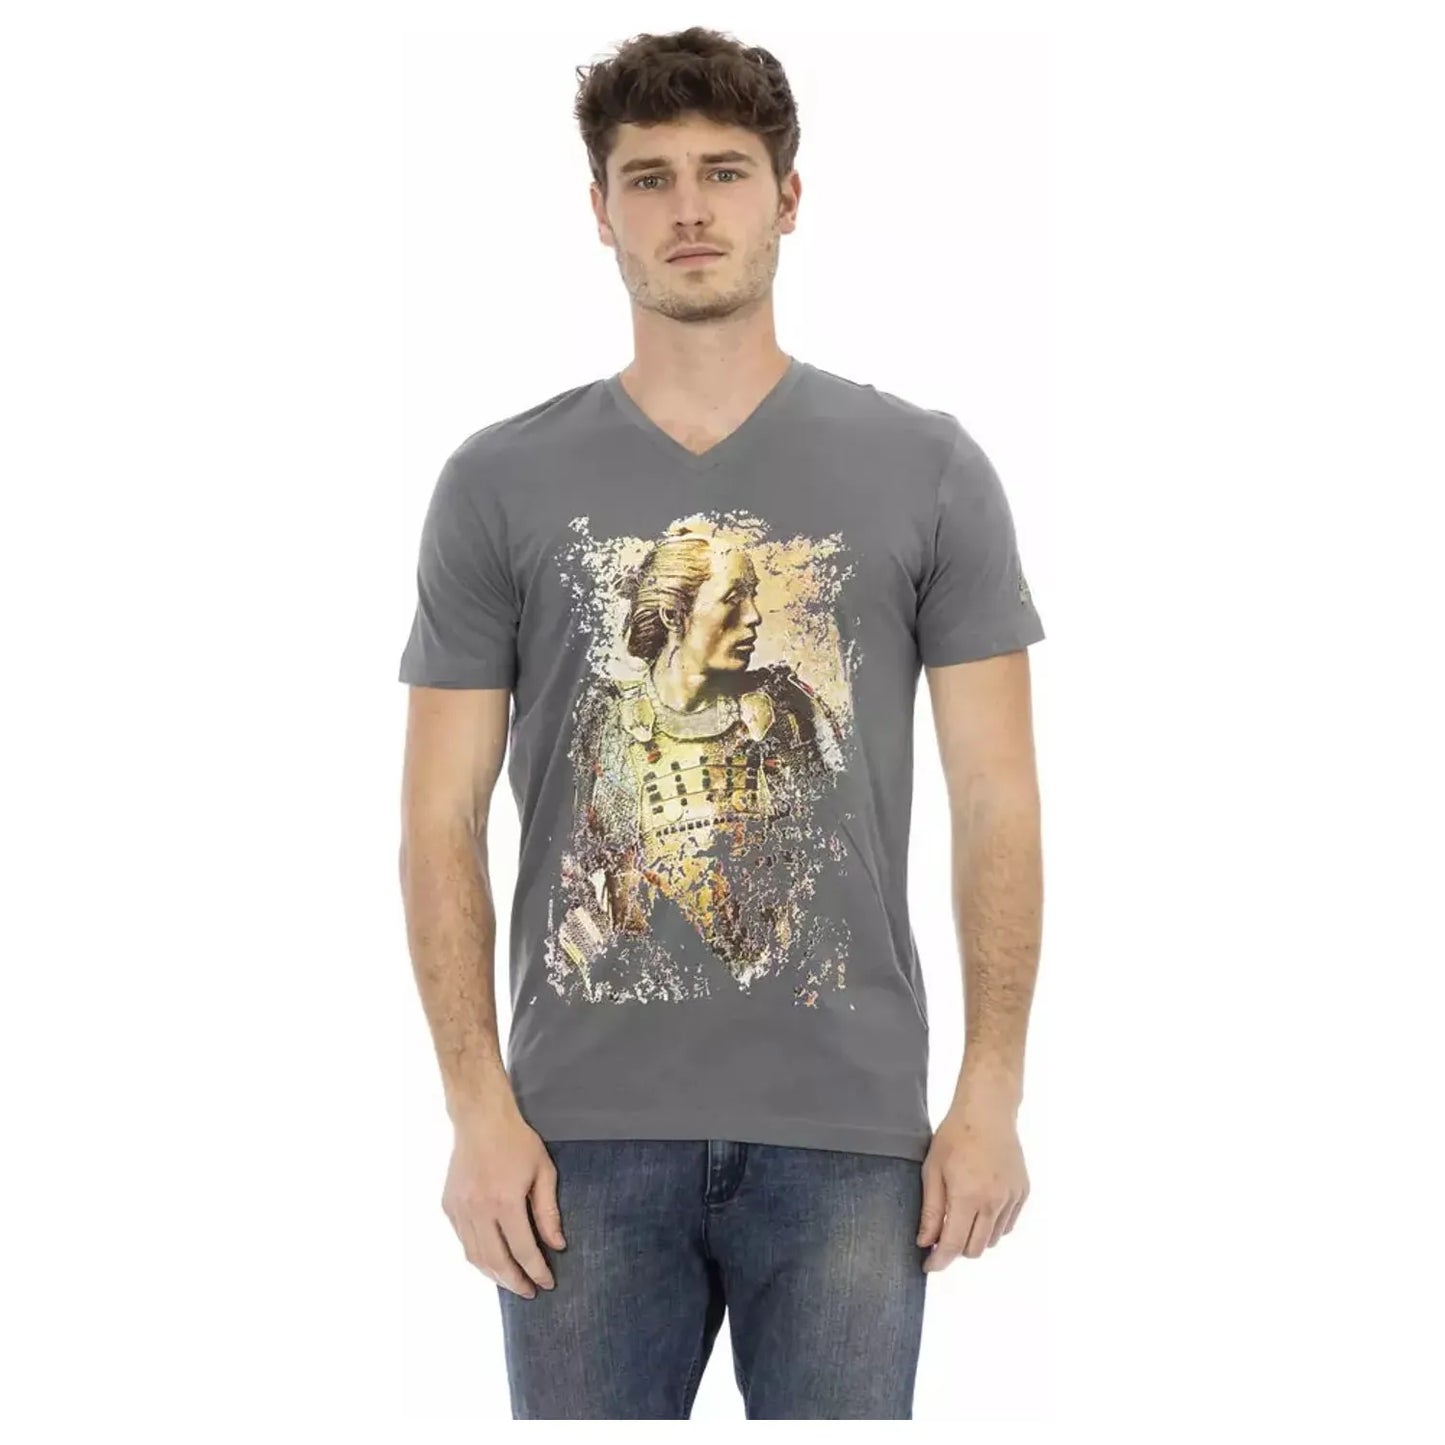 Trussardi Action Chic V-Neck Gray Tee with Striking Front Print gray-cotton-t-shirt-55